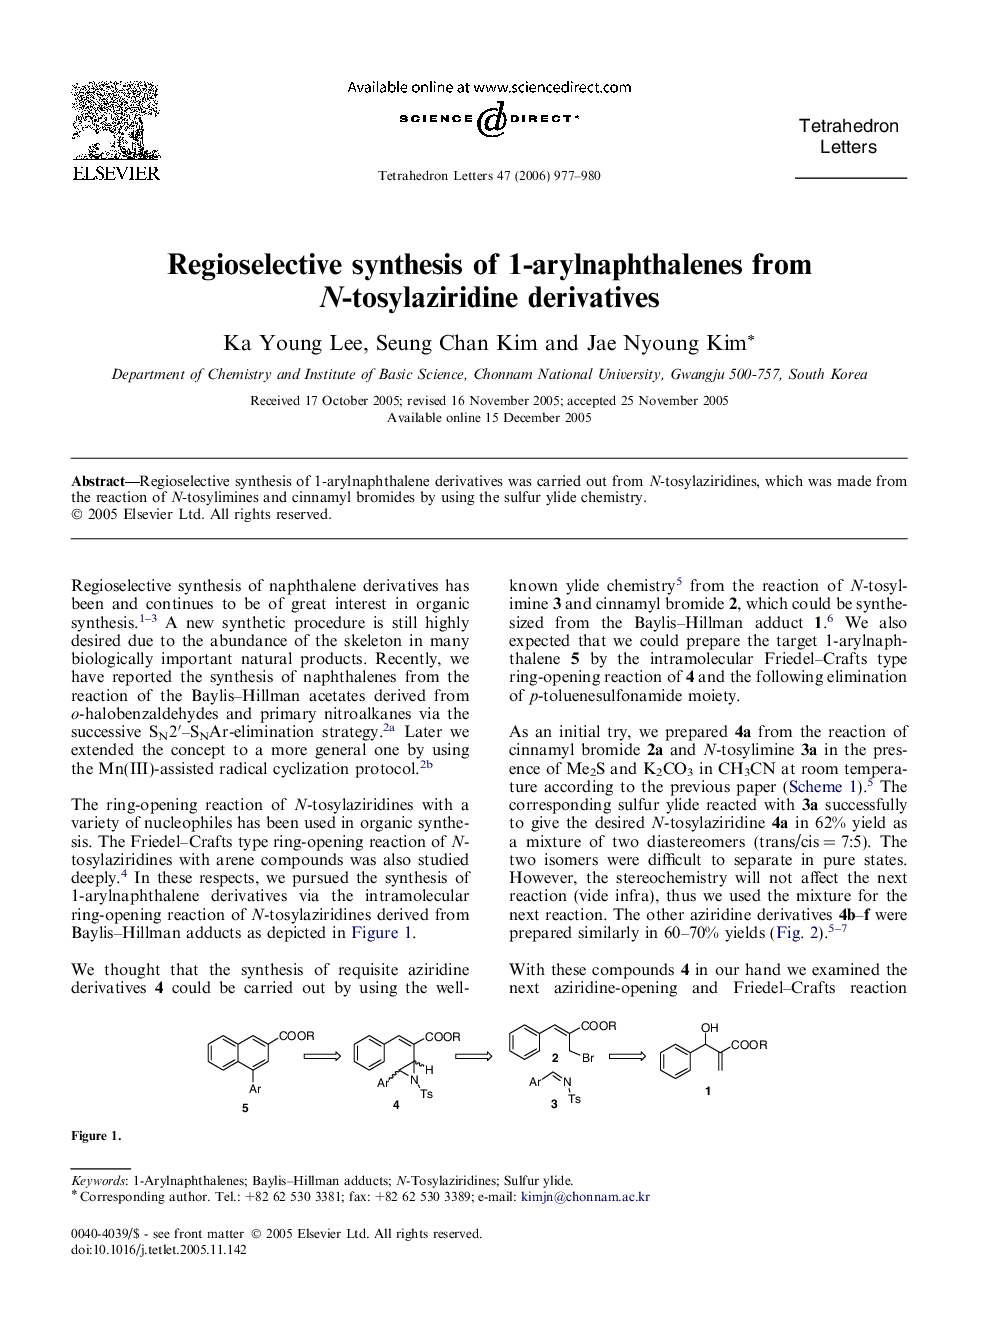 Regioselective synthesis of 1-arylnaphthalenes from N-tosylaziridine derivatives